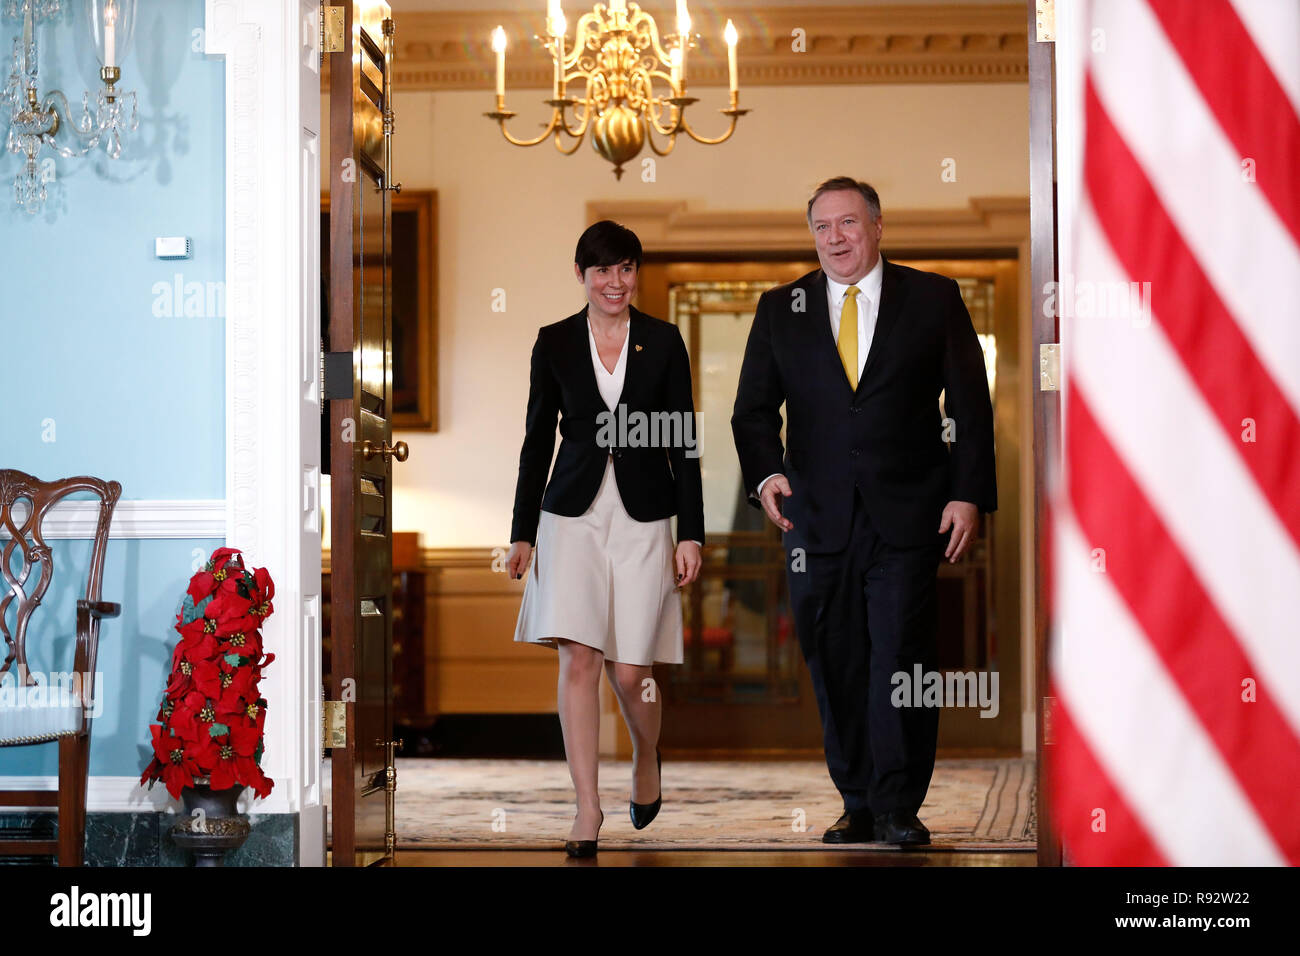 Washington, USA. 19th Dec, 2018. U.S. Secretary of State Mike Pompeo (R) meets with Norwegian Foreign Minister Ine Eriksen Soreide at the U.S. Department of State in Washington, DC, the United States, on Dec. 19, 2018. Credit: Ting Shen/Xinhua/Alamy Live News Stock Photo